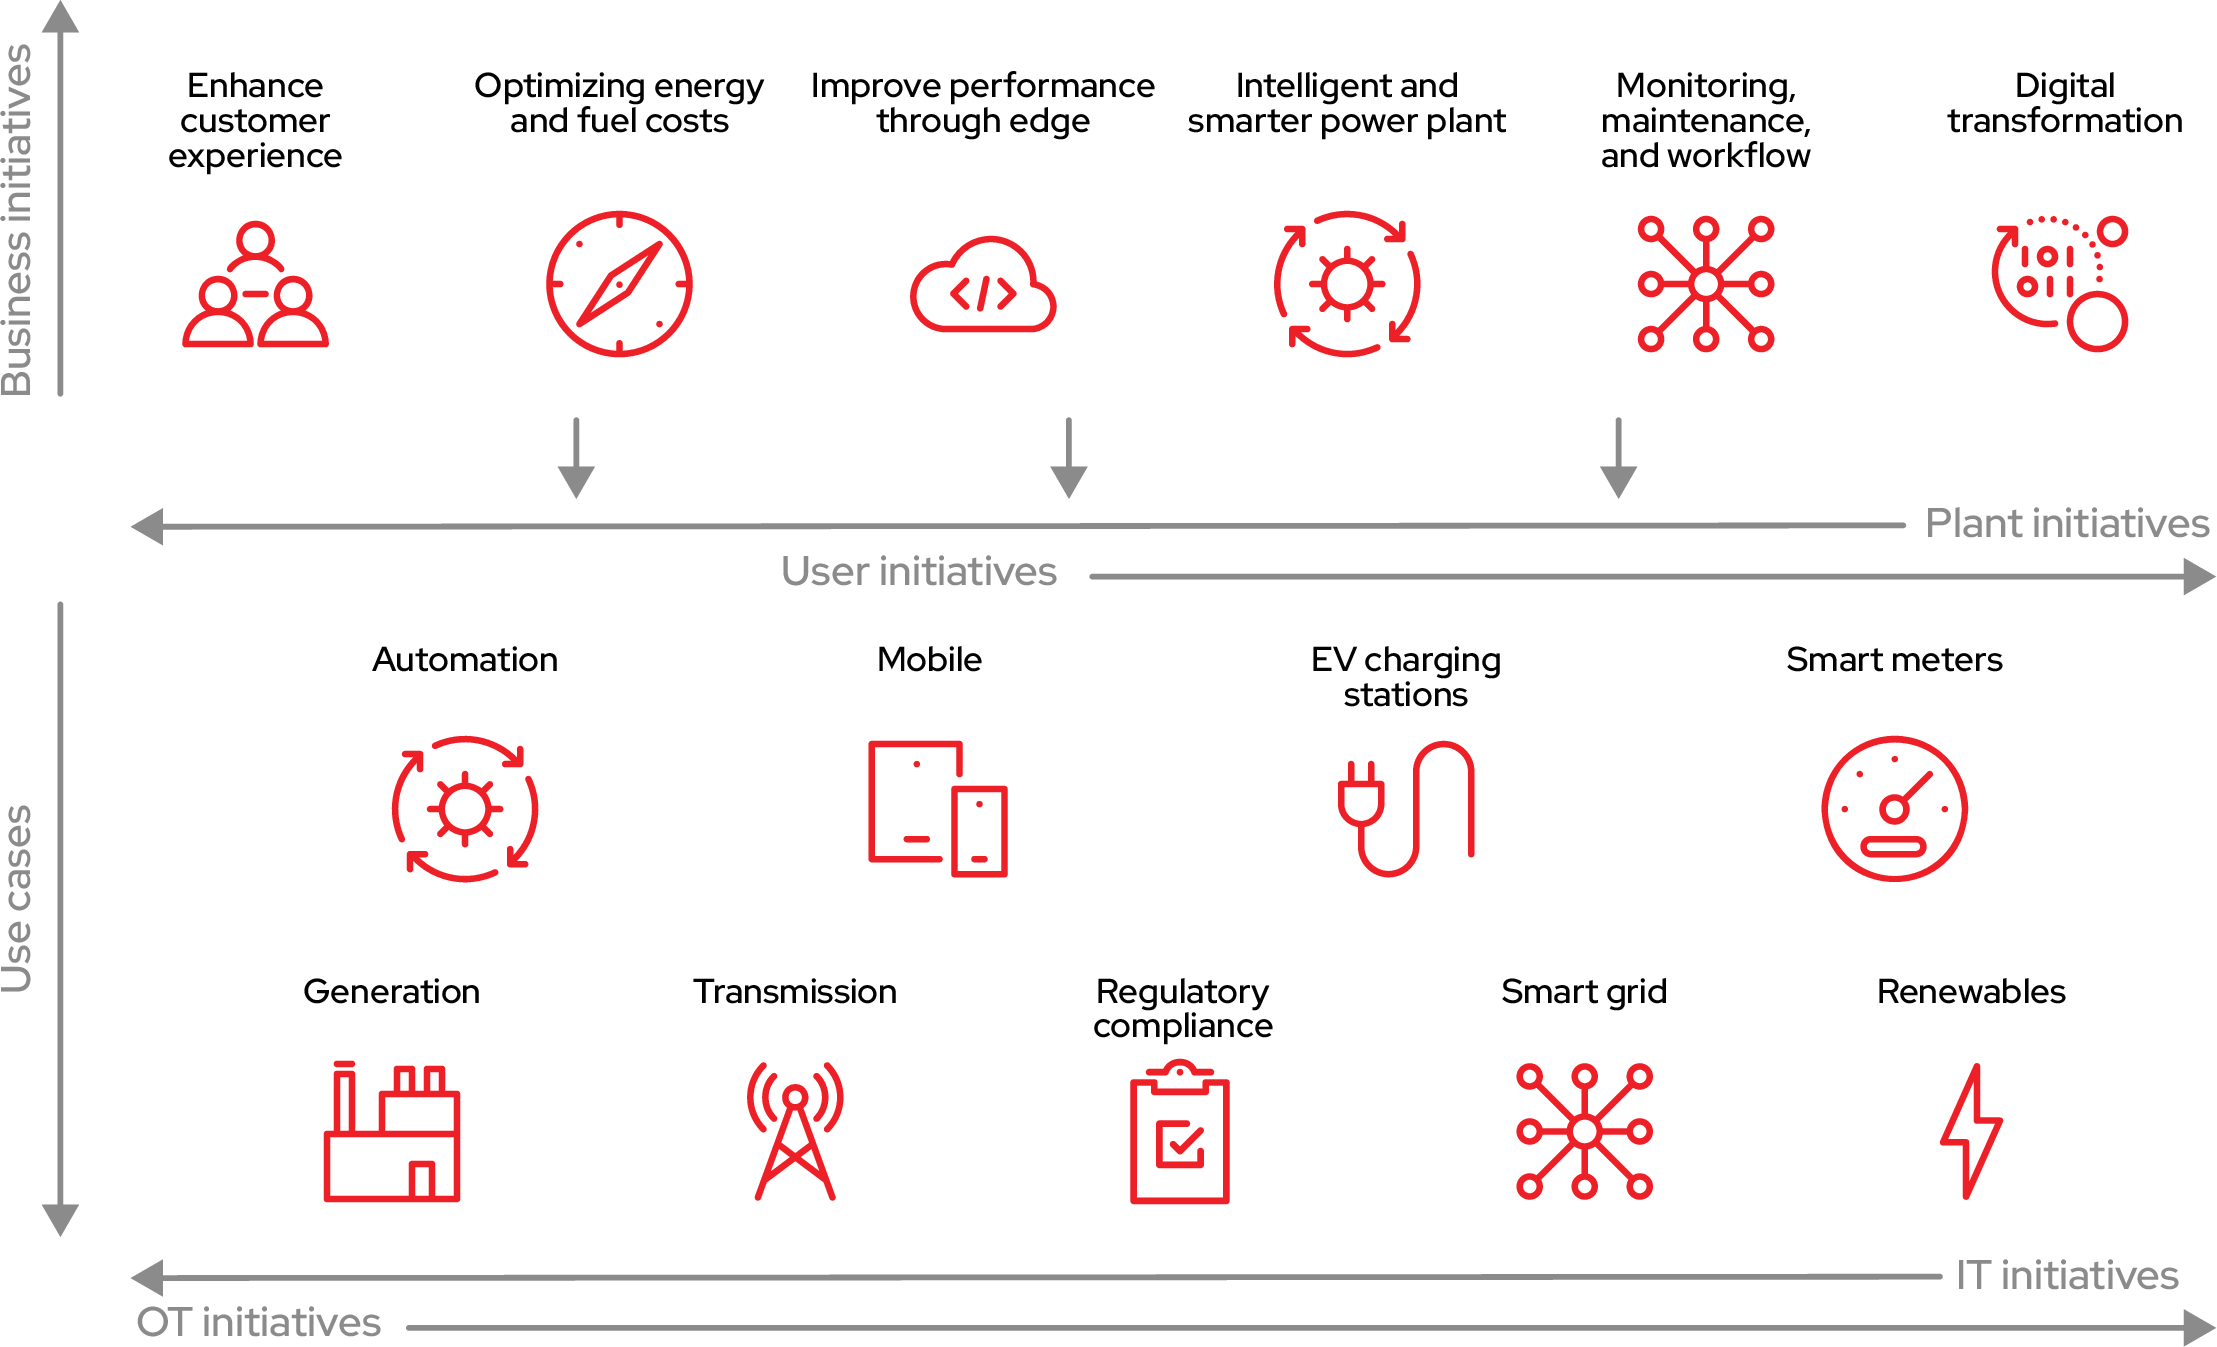 Figure 1. Energy industry business initiatives and use cases